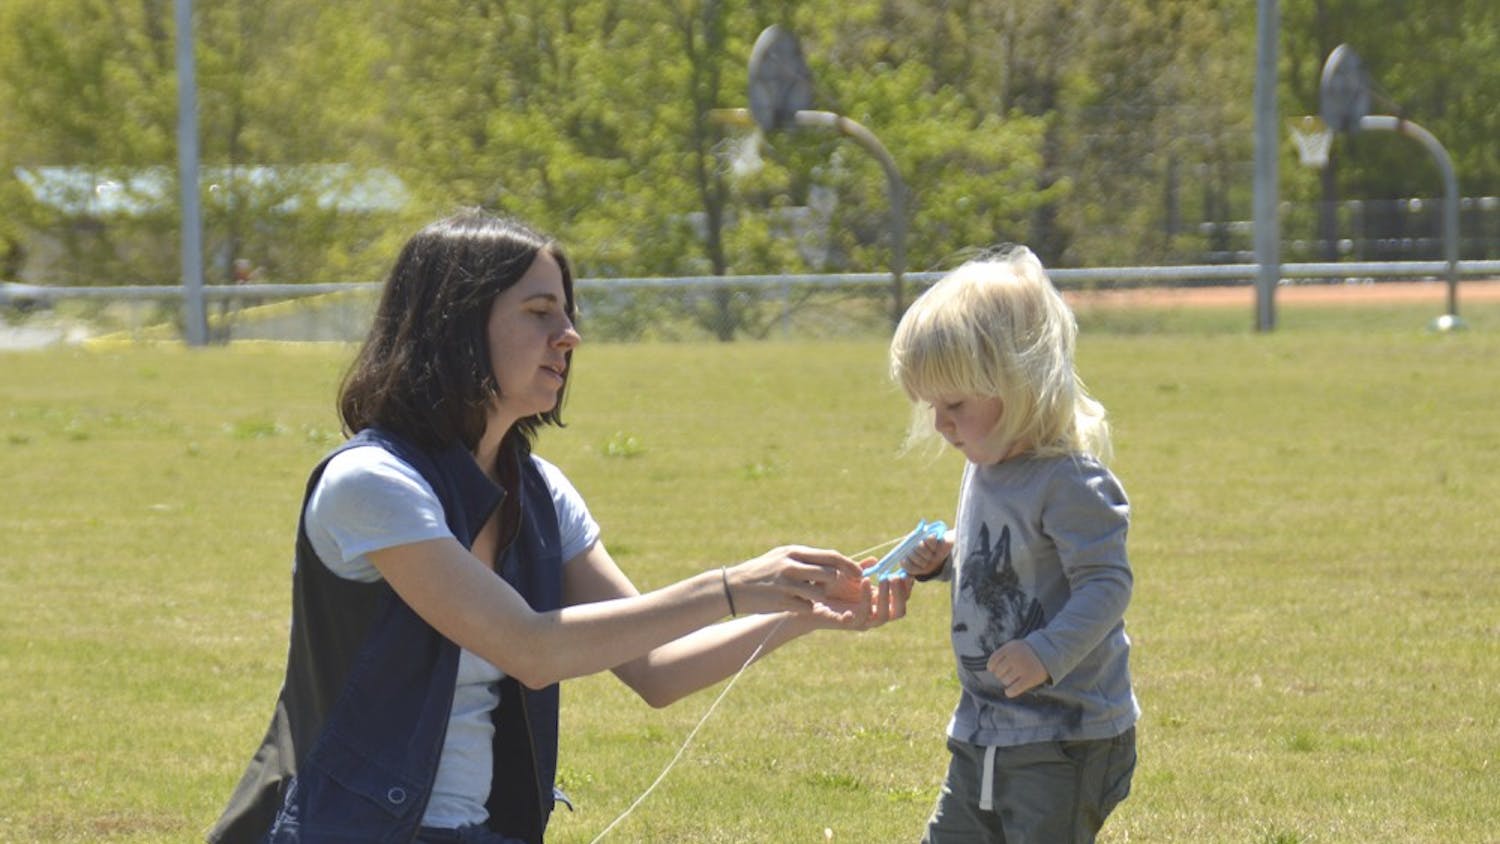 Carrboro Kite Fly takes place on Sunday Apr.17  from 1PM to 3 PM at Hank Anderson Park. 

Andrea Wood (left) from Carrboro is teaching her two-year-old son Rye Jones(right) to fly a kite. 